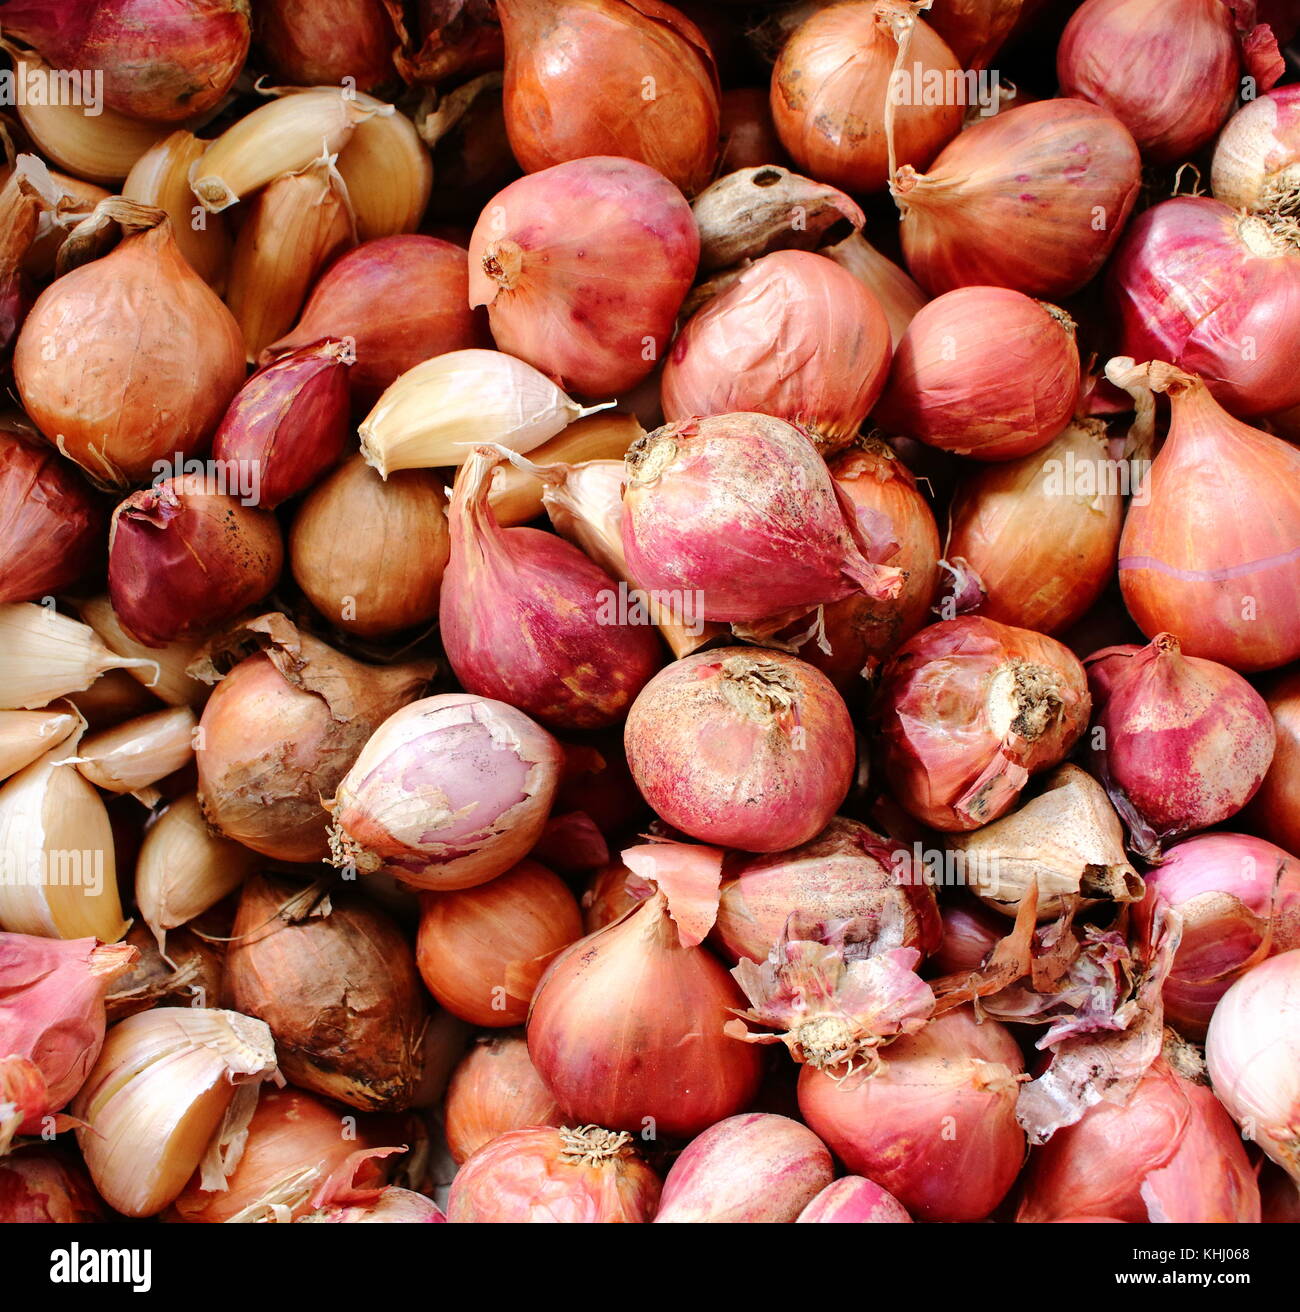 Abstract background of red shallots in the basket. Shallots is Thai herb. Top view of red shallots. Stock Photo